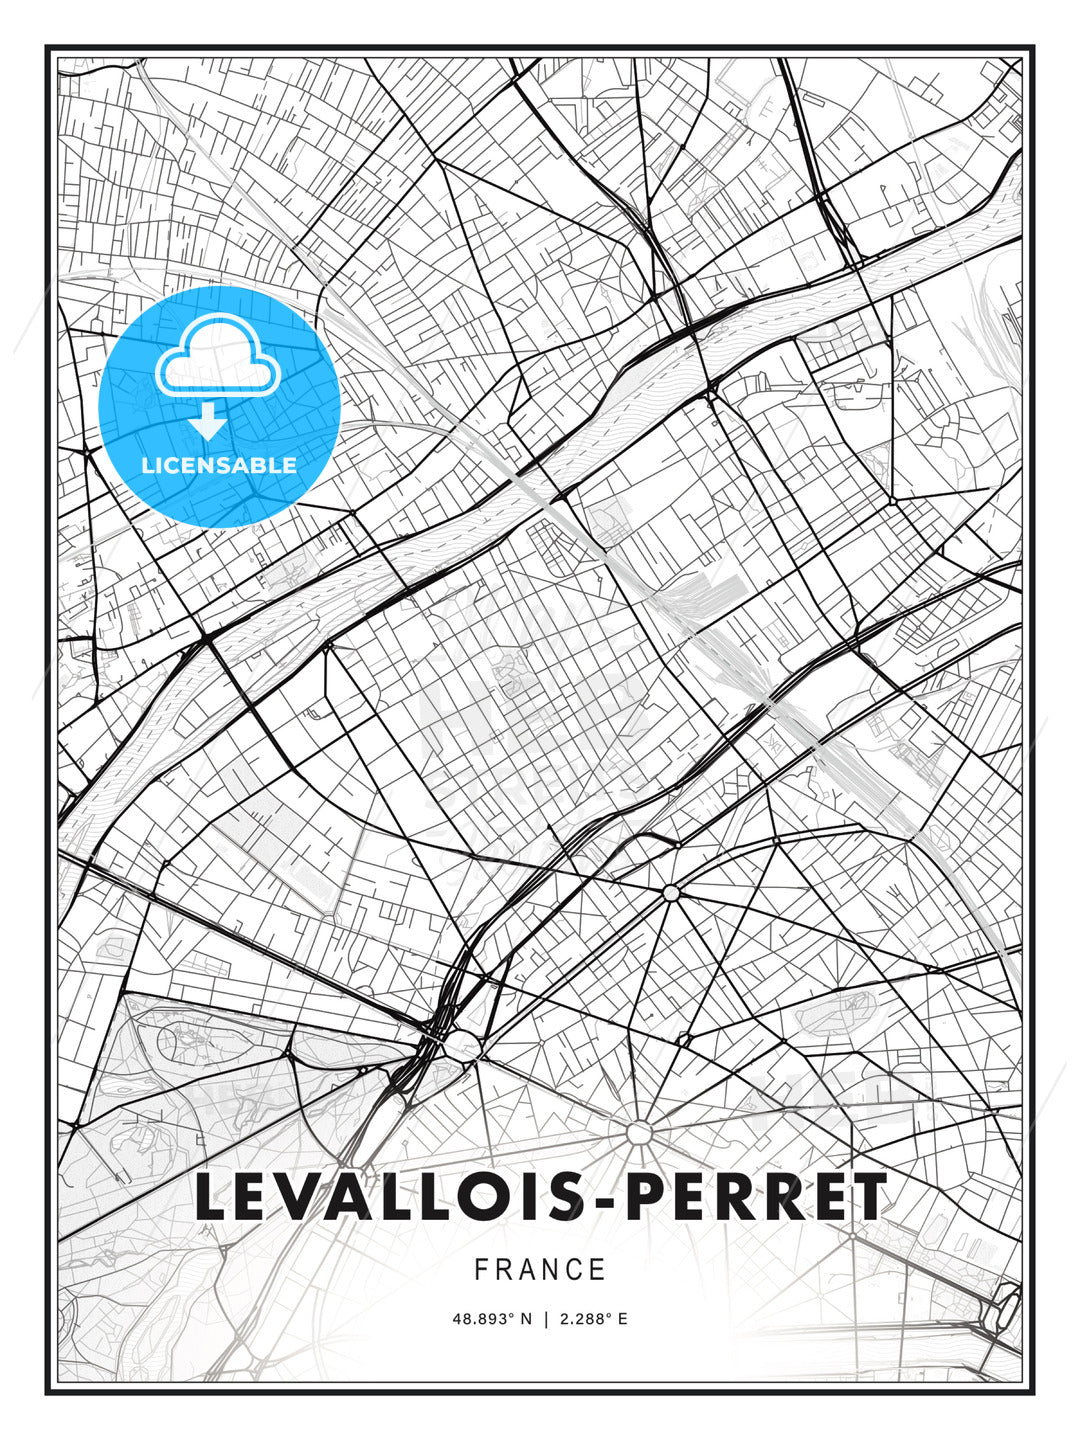 Levallois-Perret, France, Modern Print Template in Various Formats - HEBSTREITS Sketches